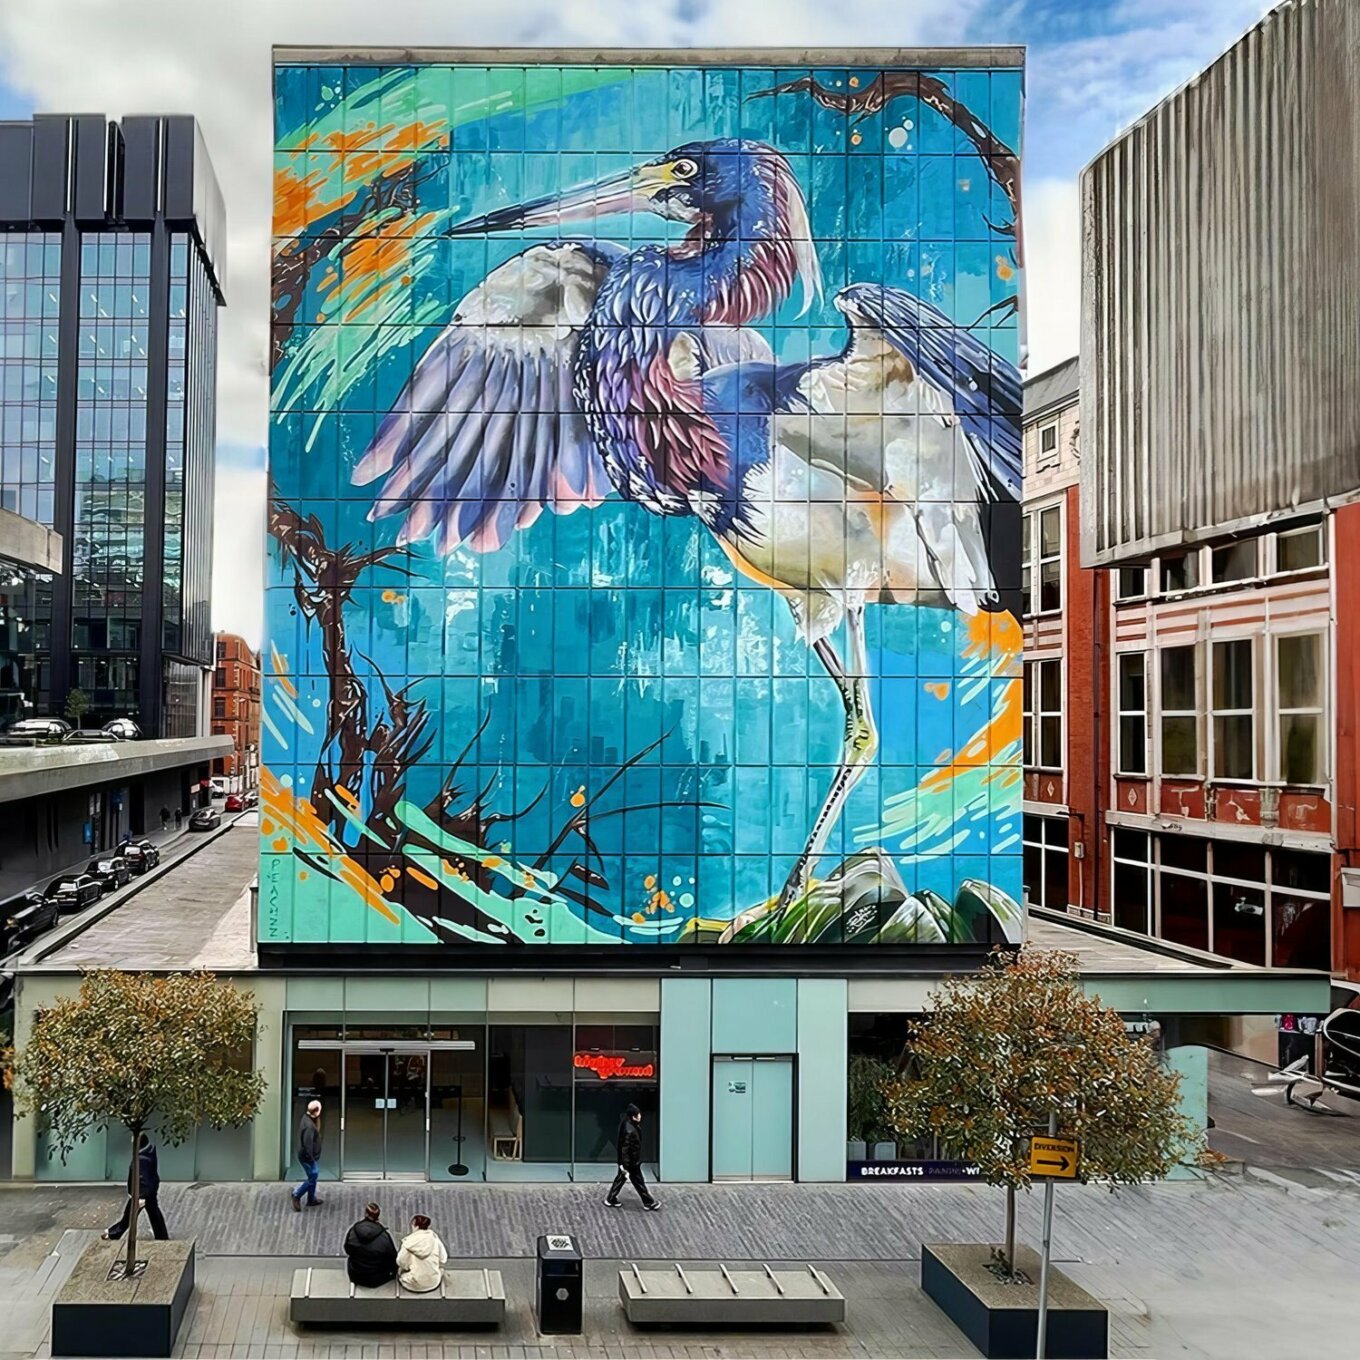 On a large city wall, there's a painting of a heron against a background of blues and greens.